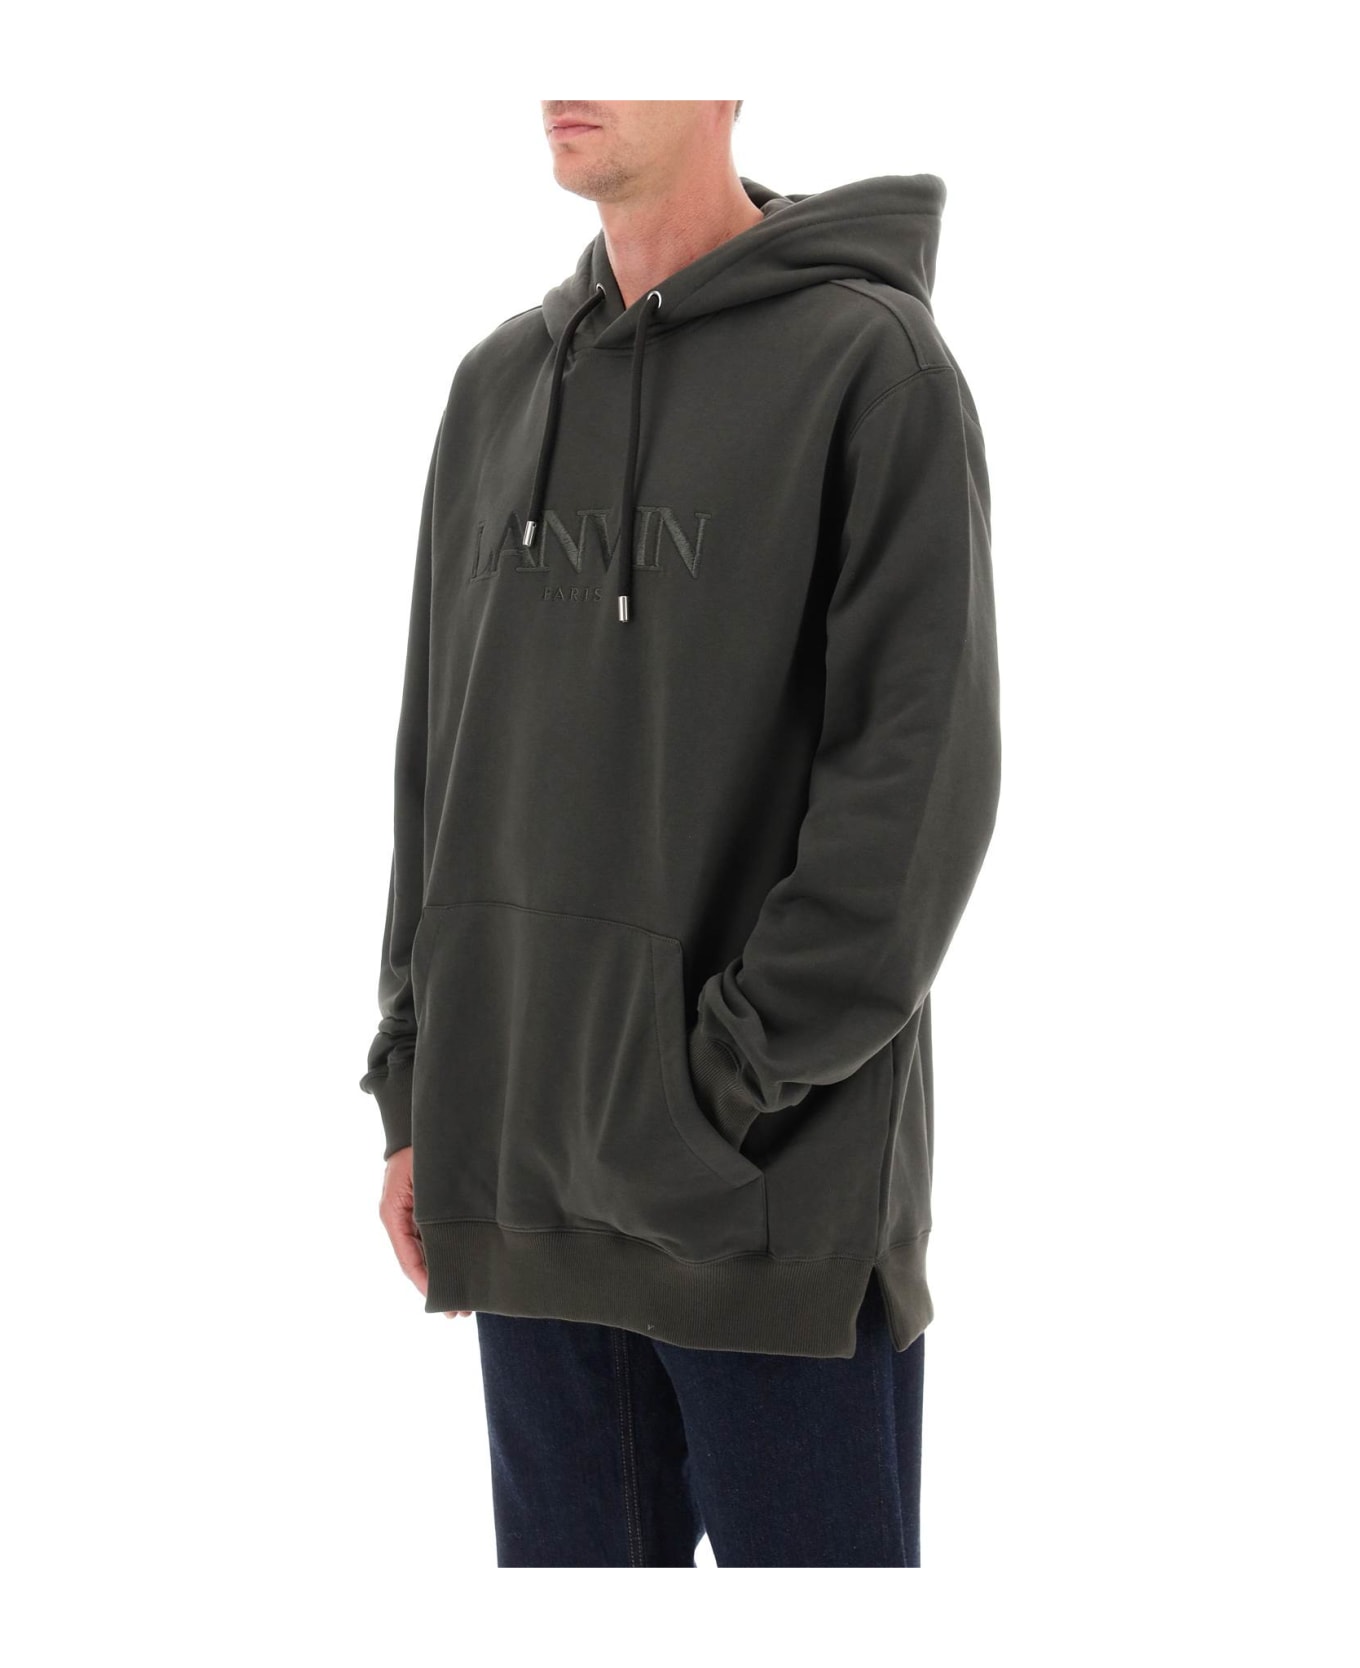 Lanvin Hoodie With Curb Embroidery - LODEN (Green)